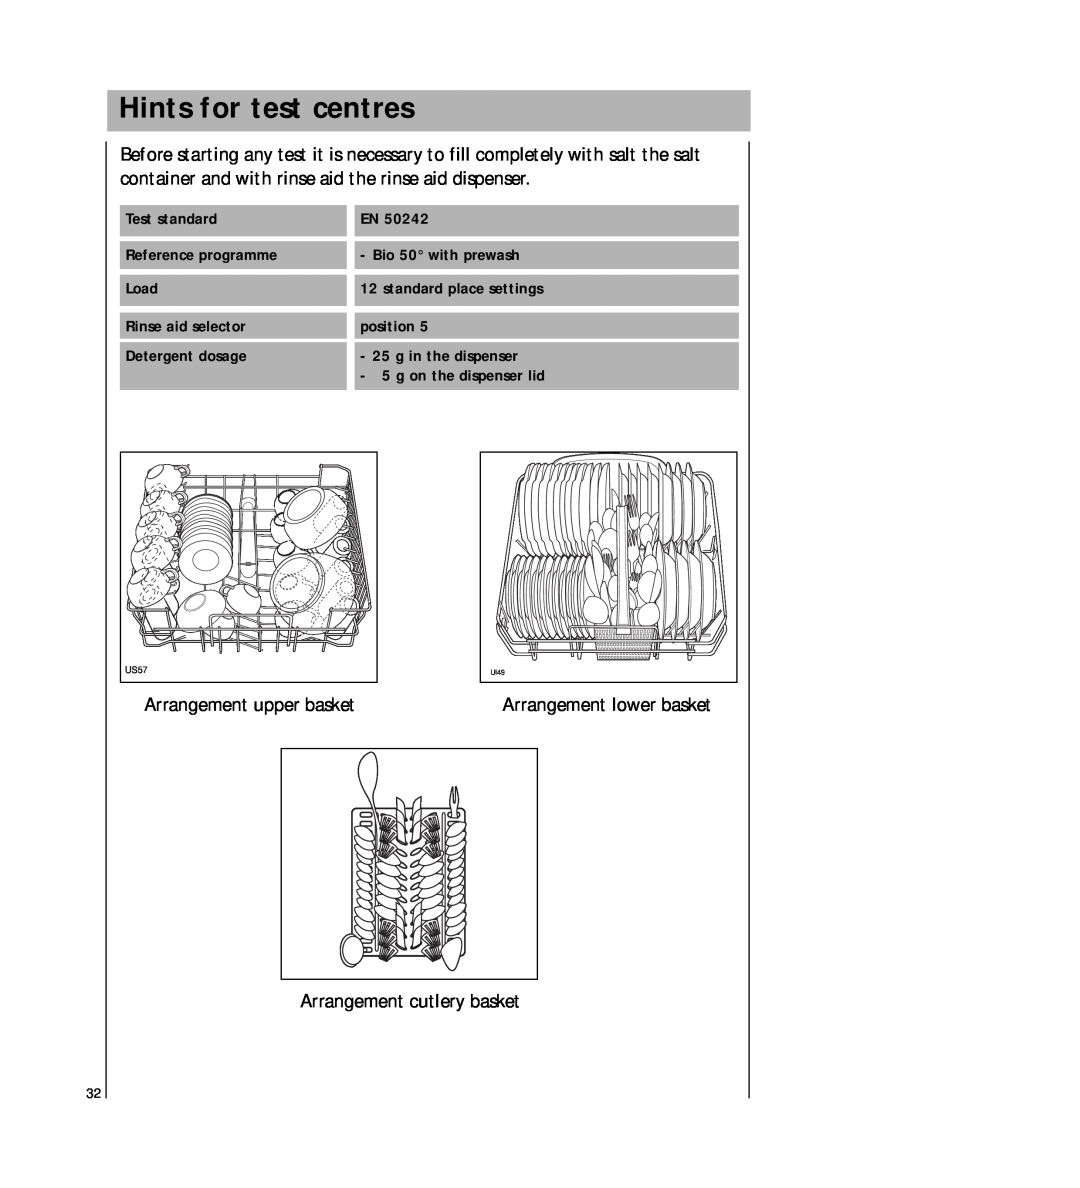 AEG 2807 manual Hints for test centres 